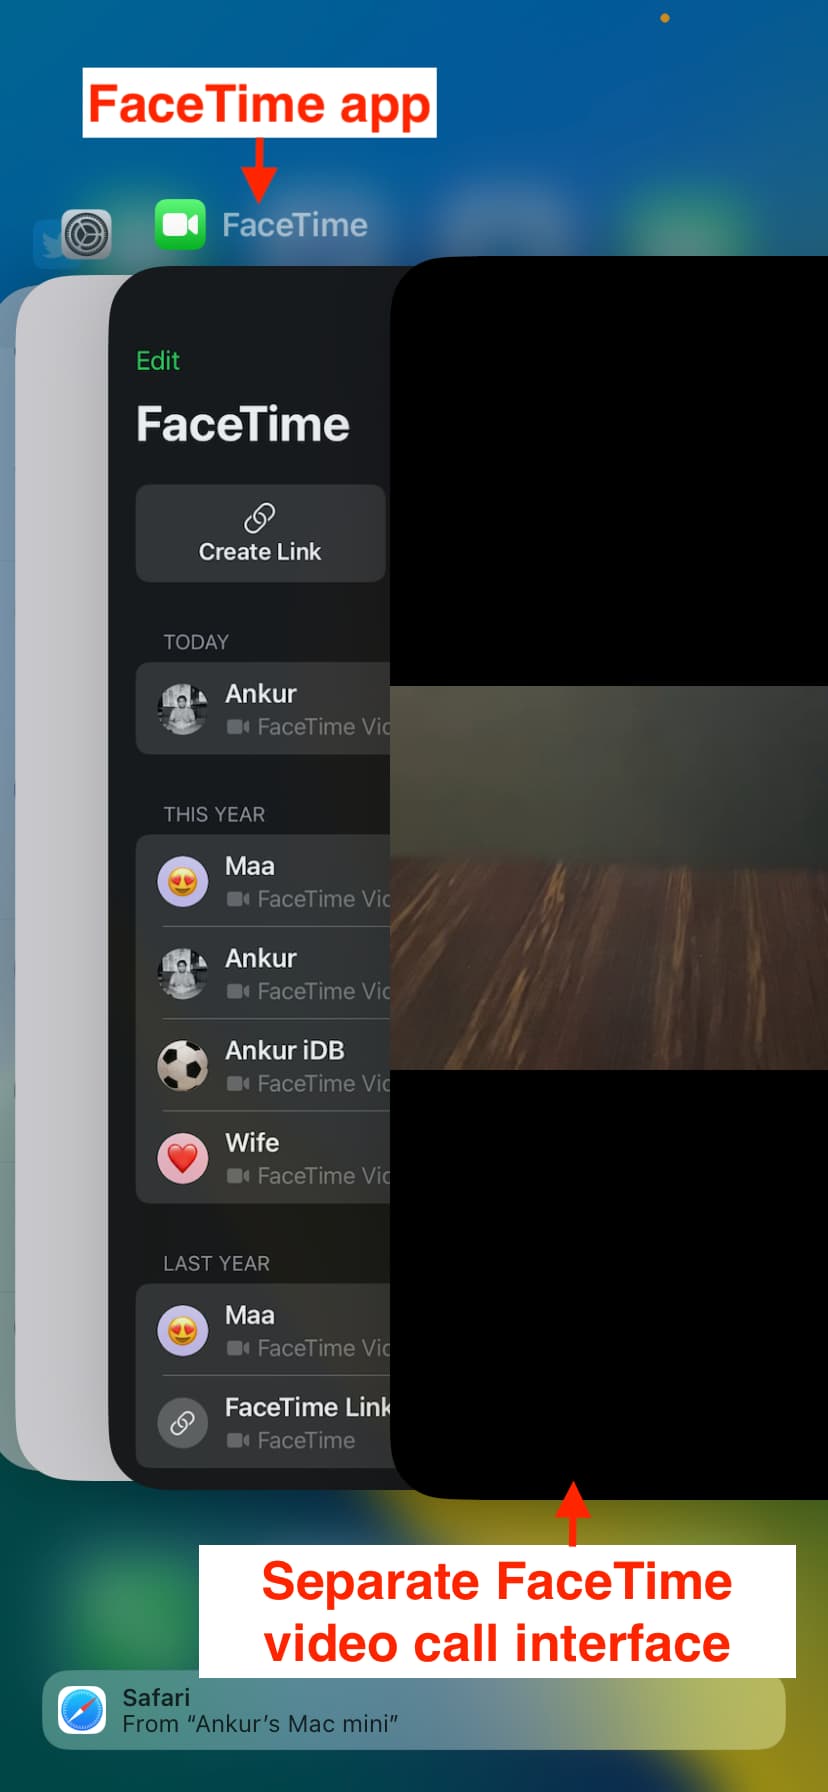 FaceTime app and video call interface in iOS App Switcher